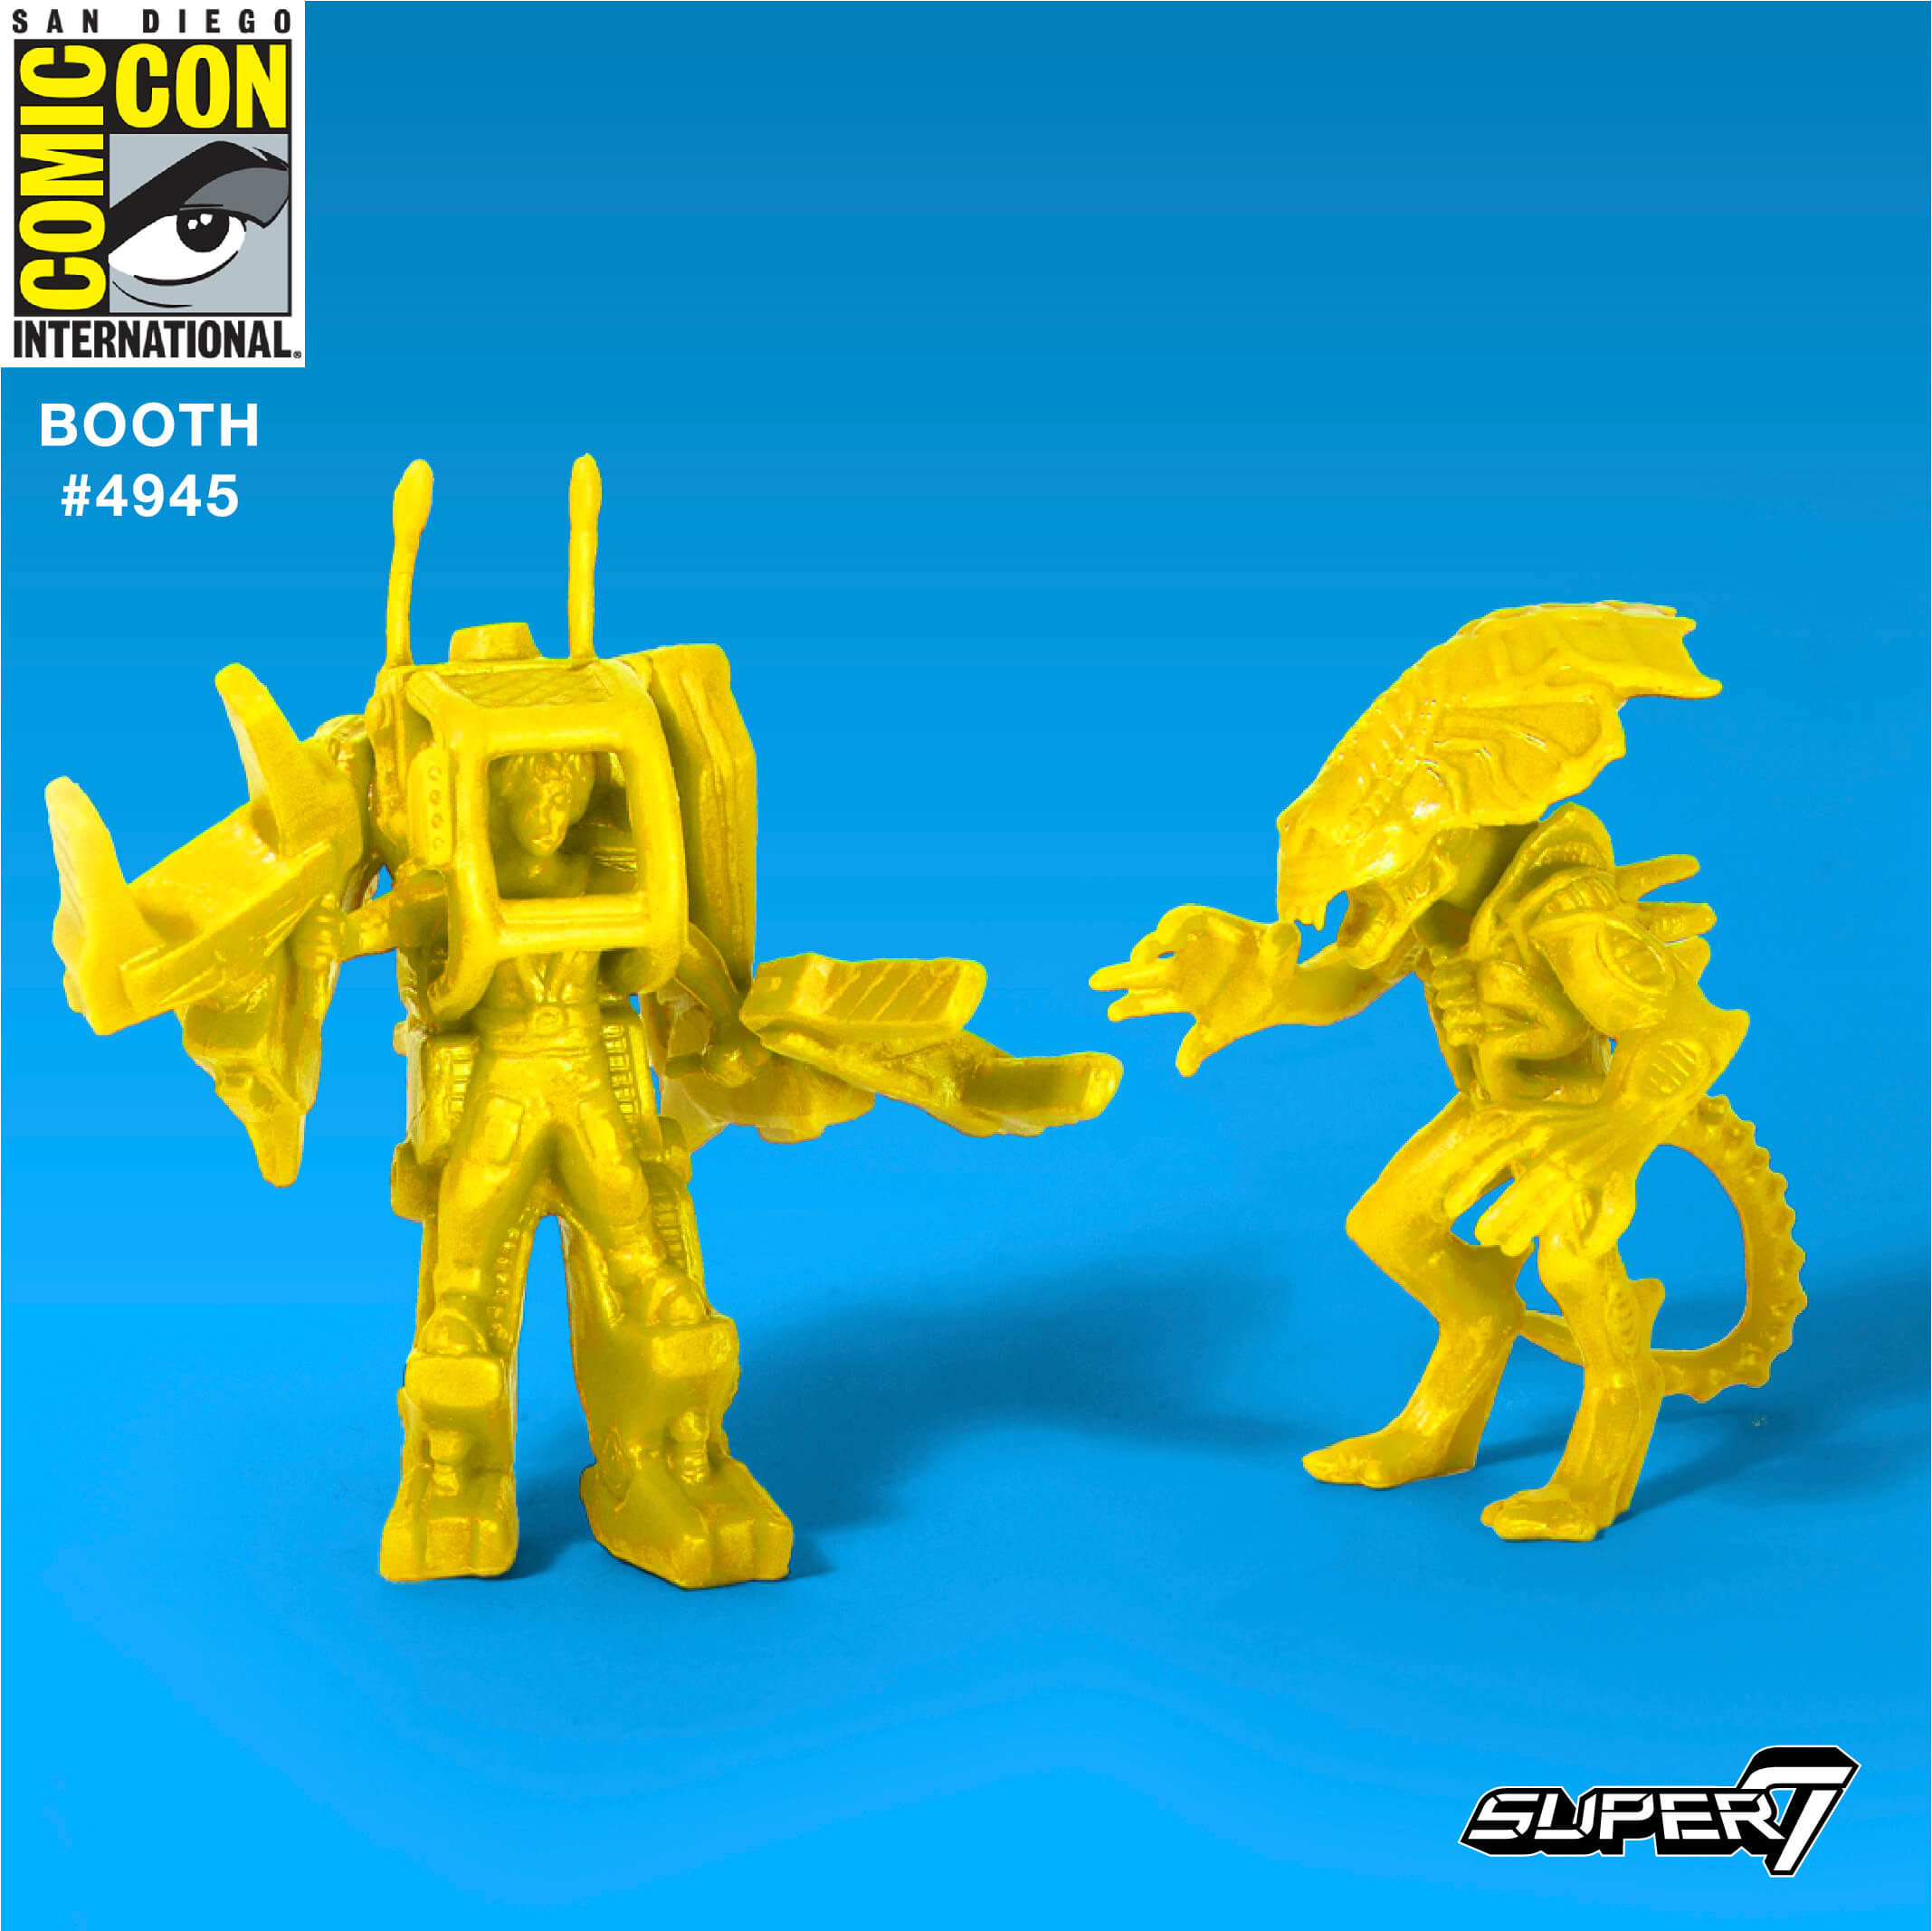 Super7 at SDCC 2017 - The Toy Chronicle